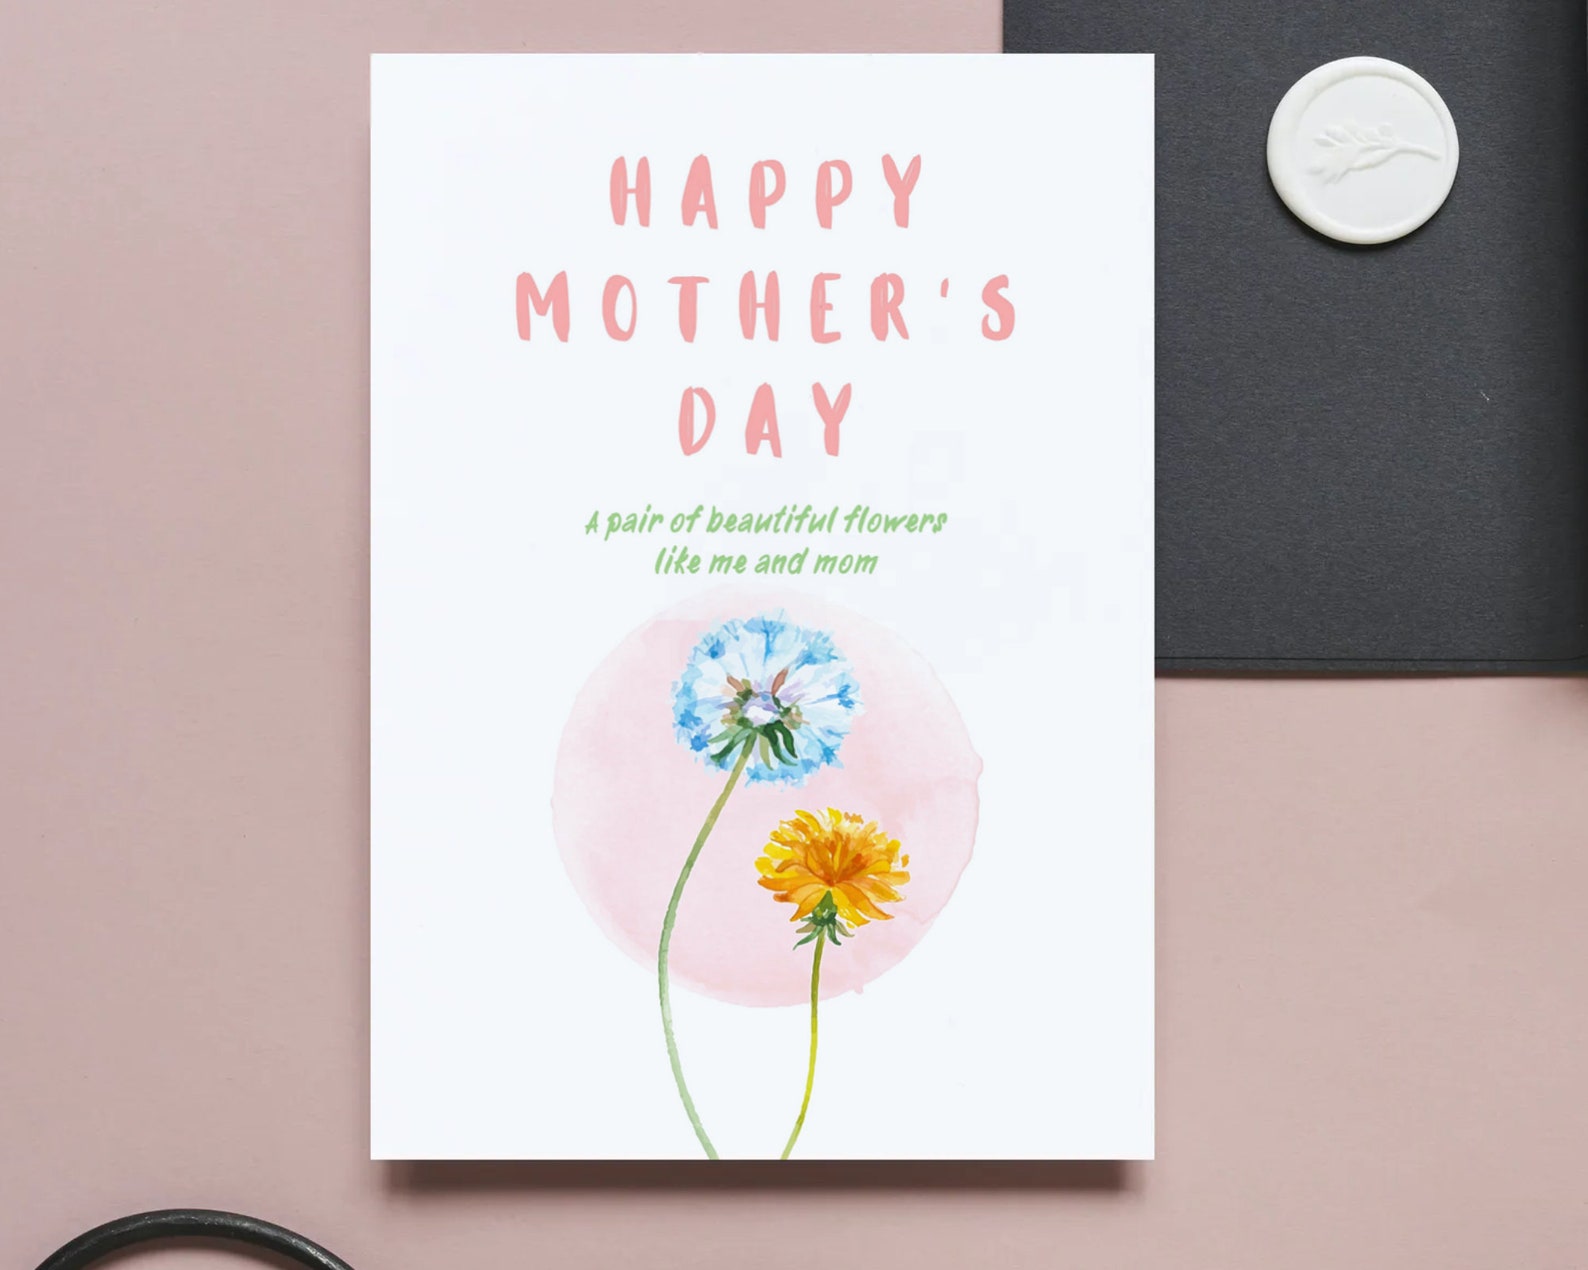 Happy Mother's Day Card / Flower Card / Dandelion / Love - Etsy